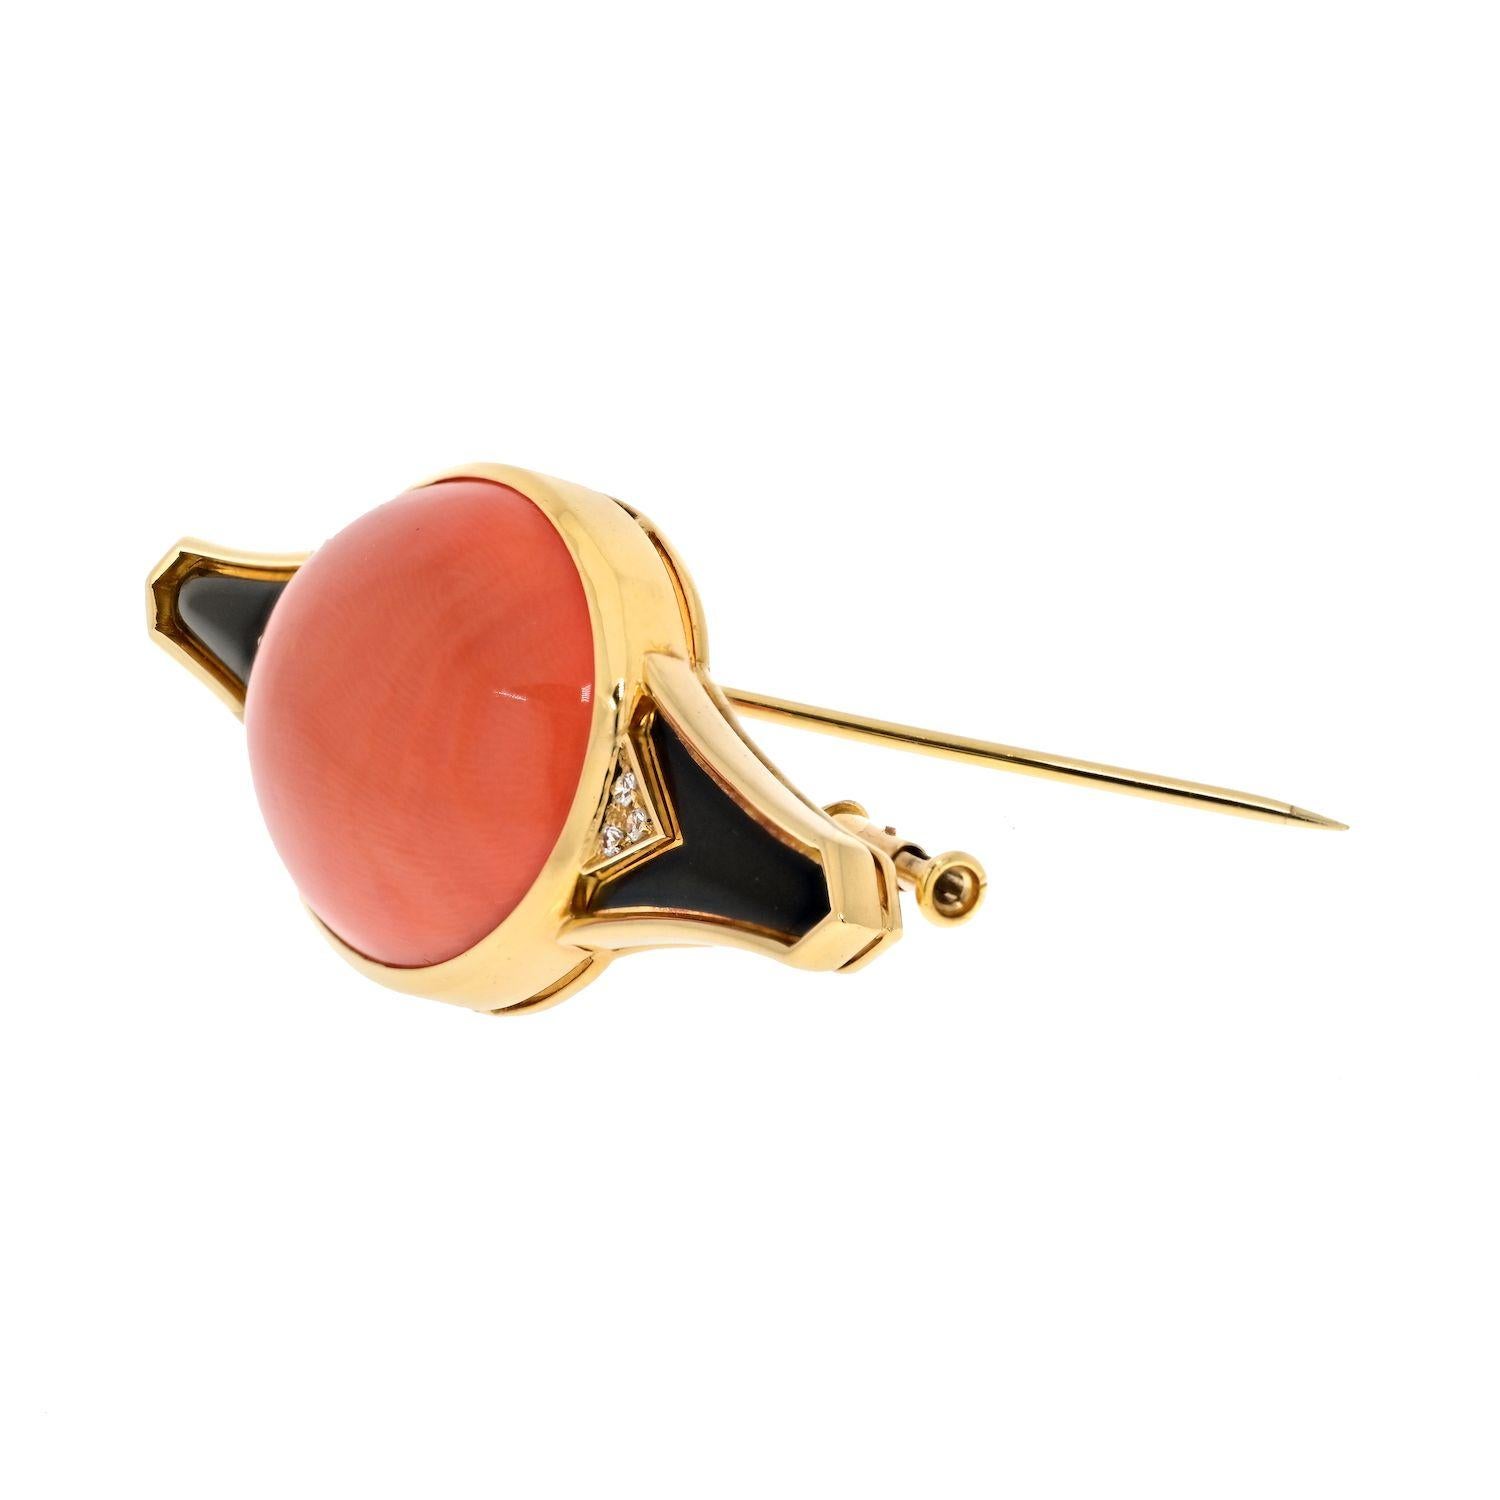 Oval Cut Bvlgari 18K Yellow Gold Coral, Black Enamel And Diamond Brooch For Sale